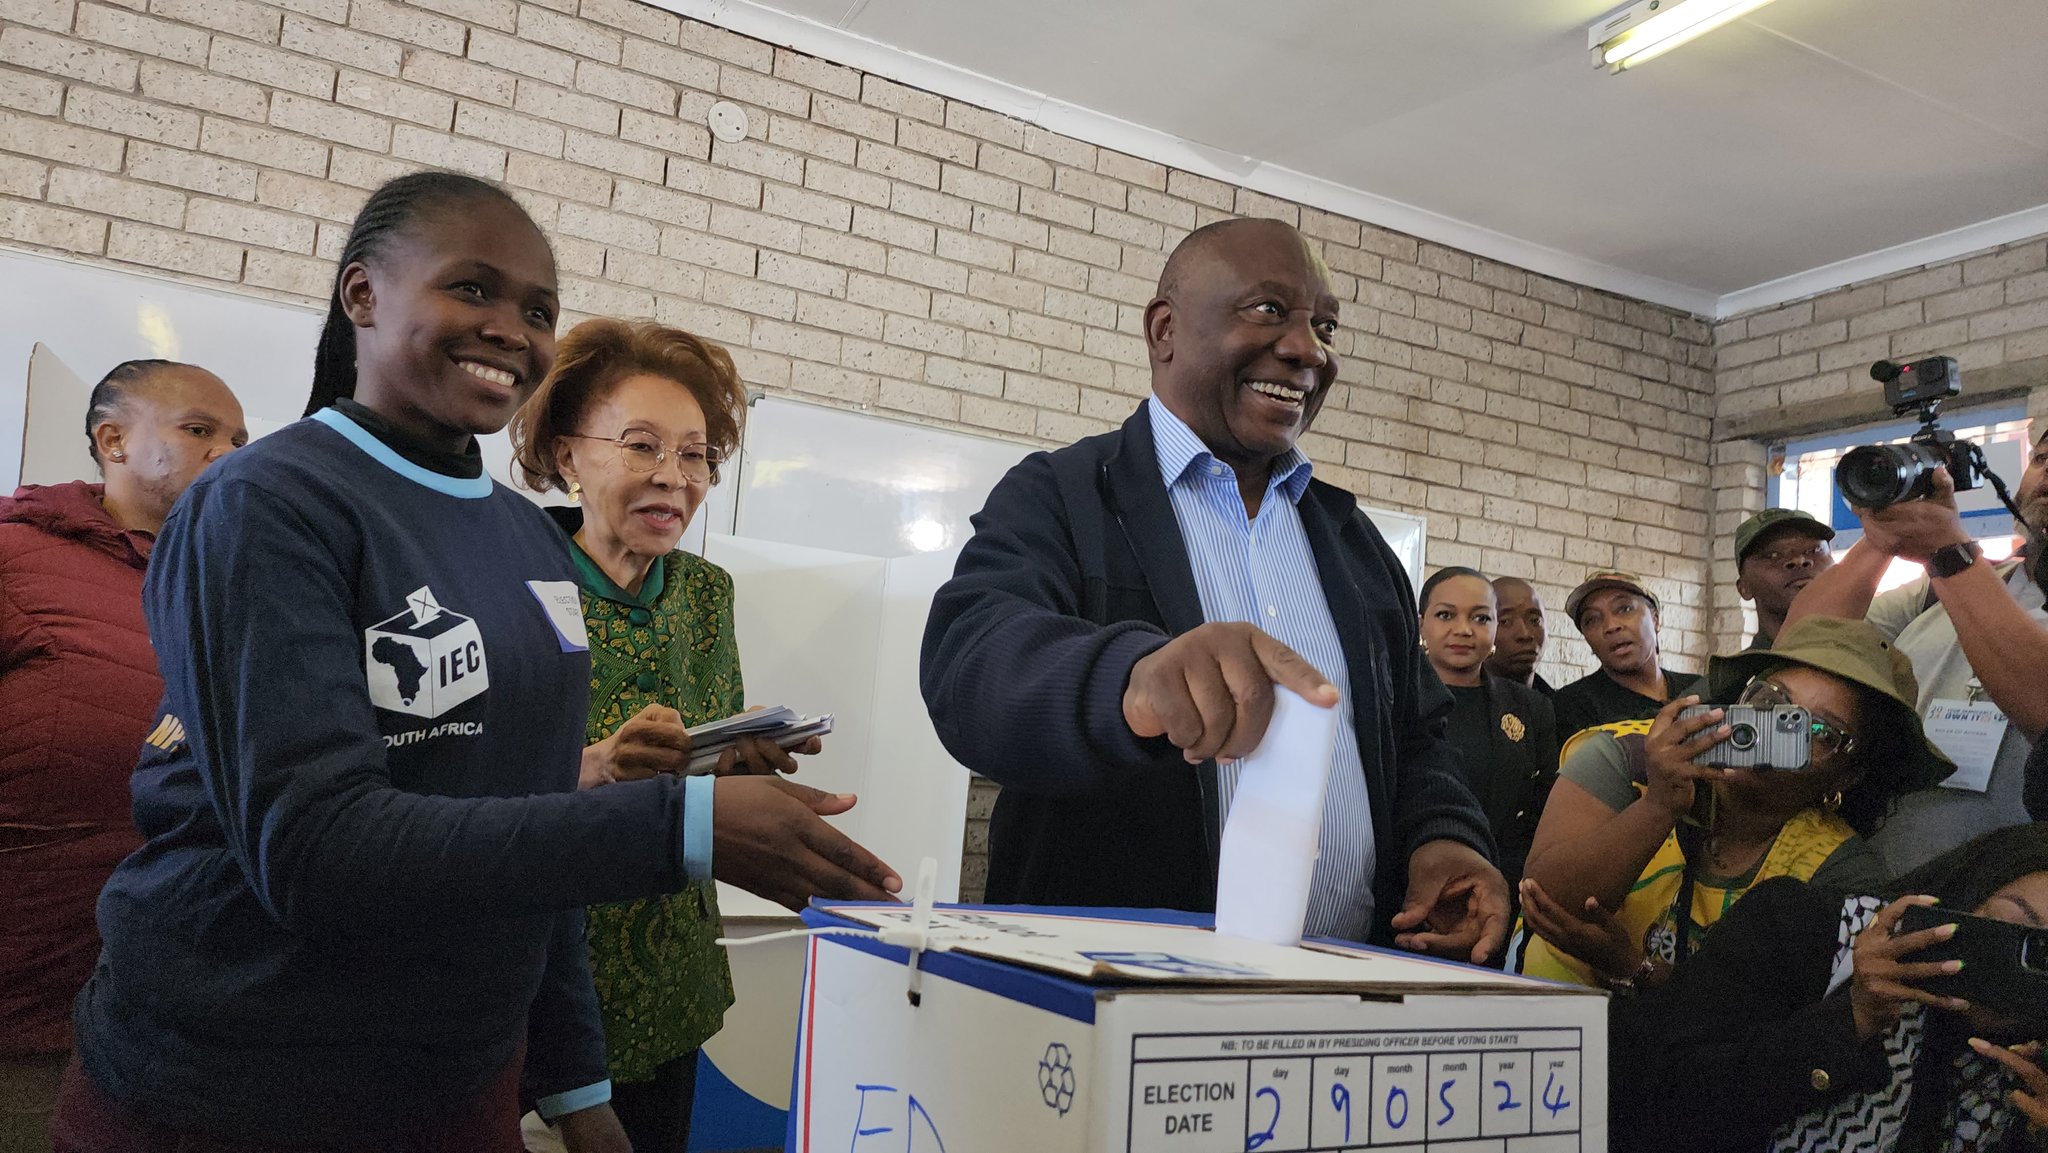 President Ramaphosa and wife’s intimate moments at voting station break the internet